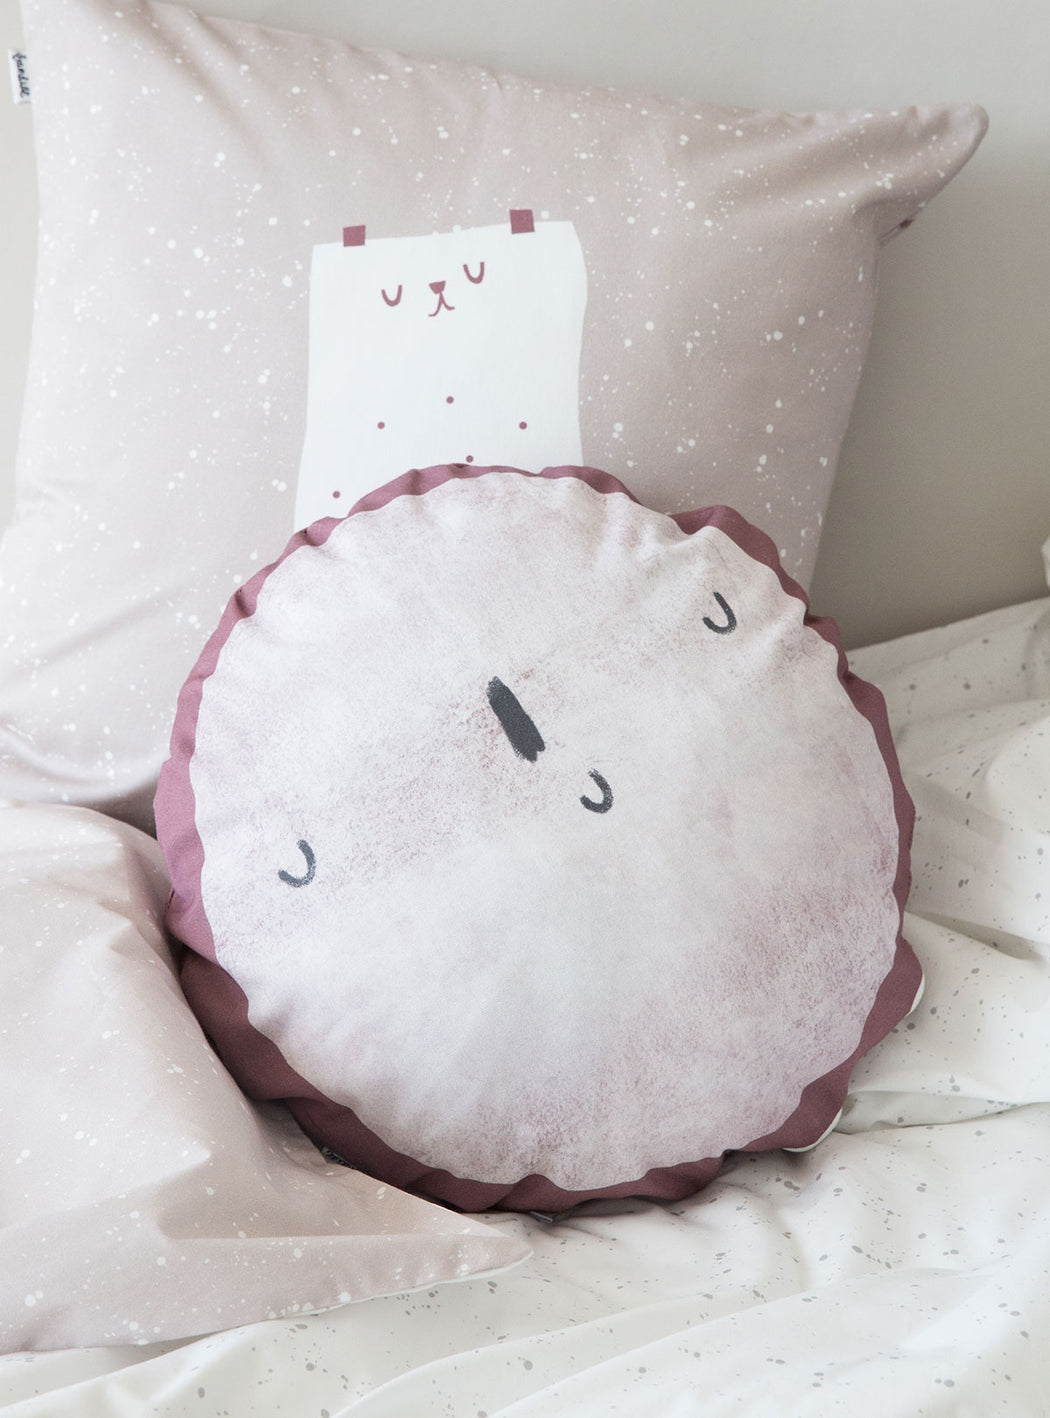 Set of Pink Cosmos Duvet cover for bed of 90 cm + Bang, zoom to the moon Pillow 40 cm